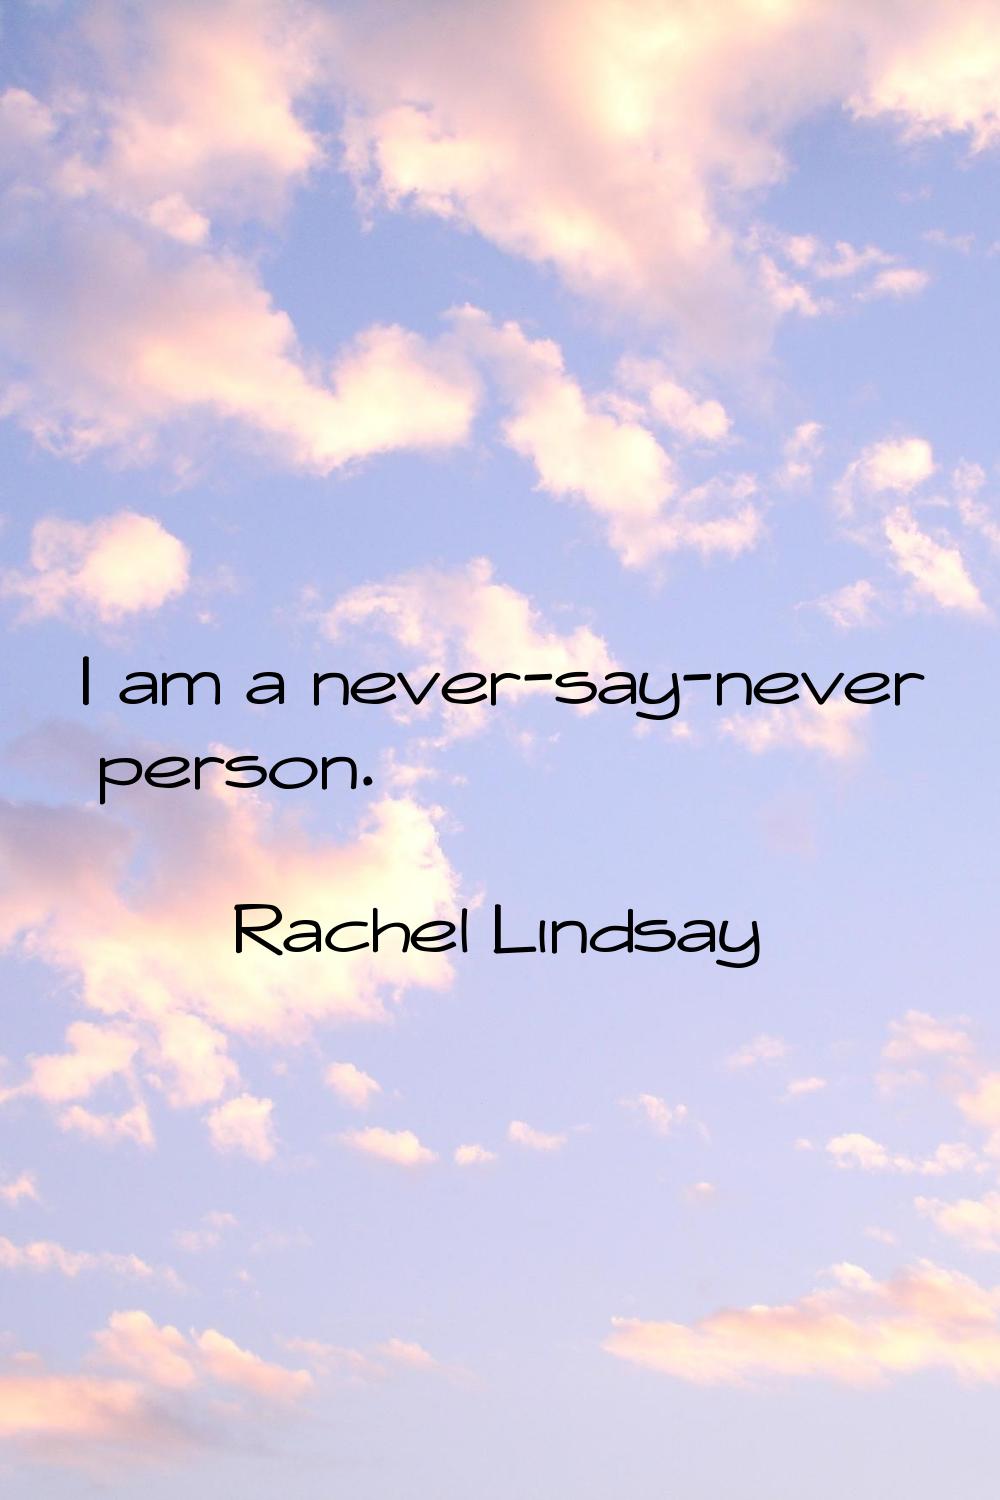 I am a never-say-never person.